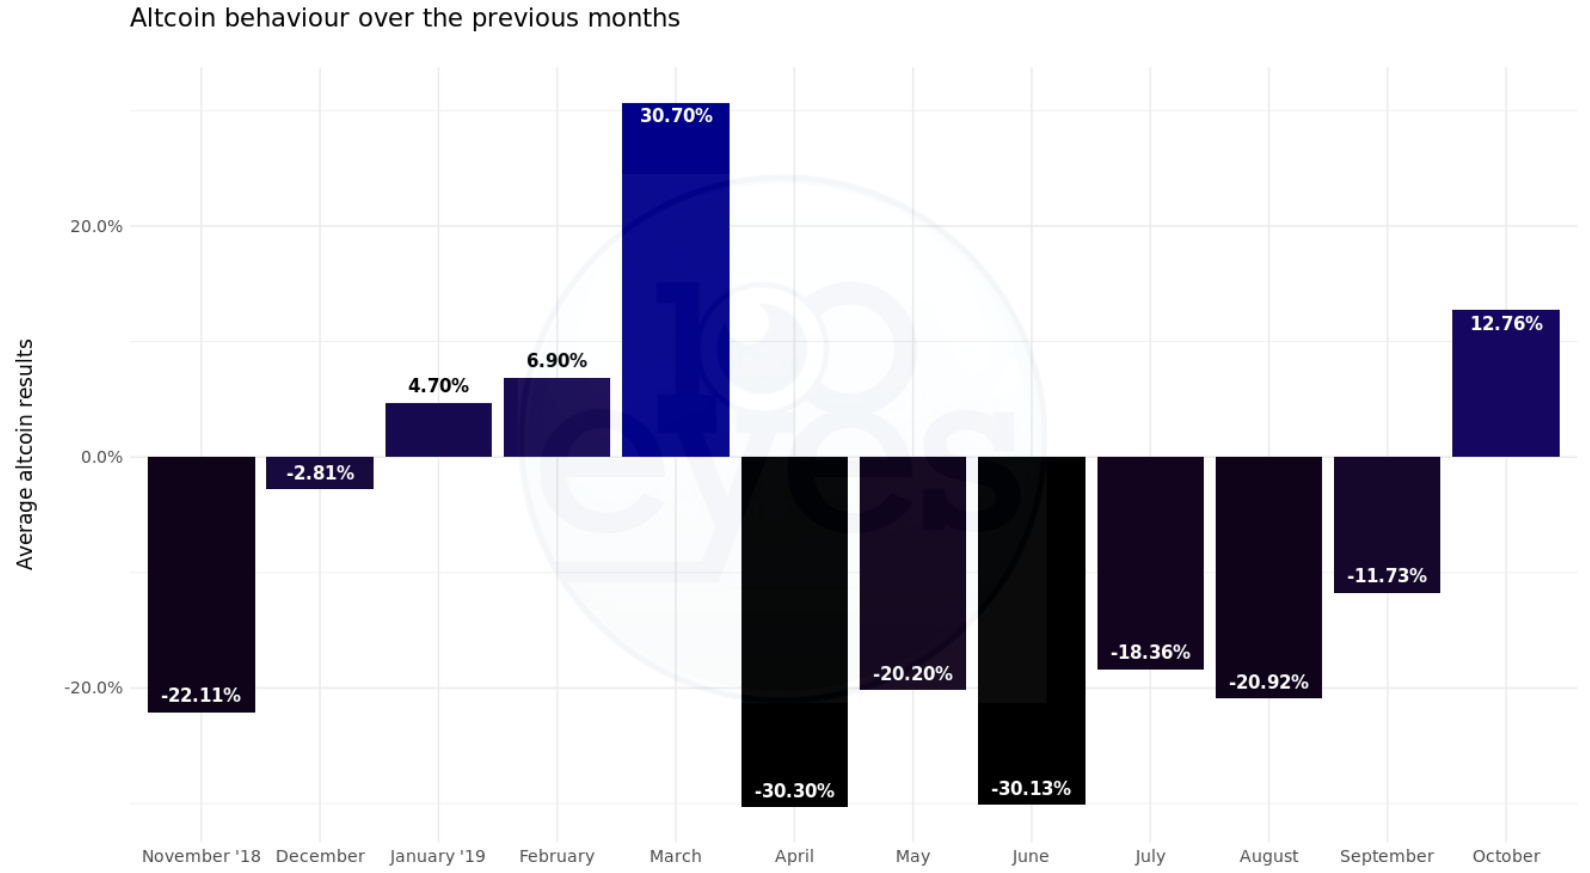 After six consecutive months of declining prices, the crypto market finally showed some life in October. Bitcoin gained 10.8% this month